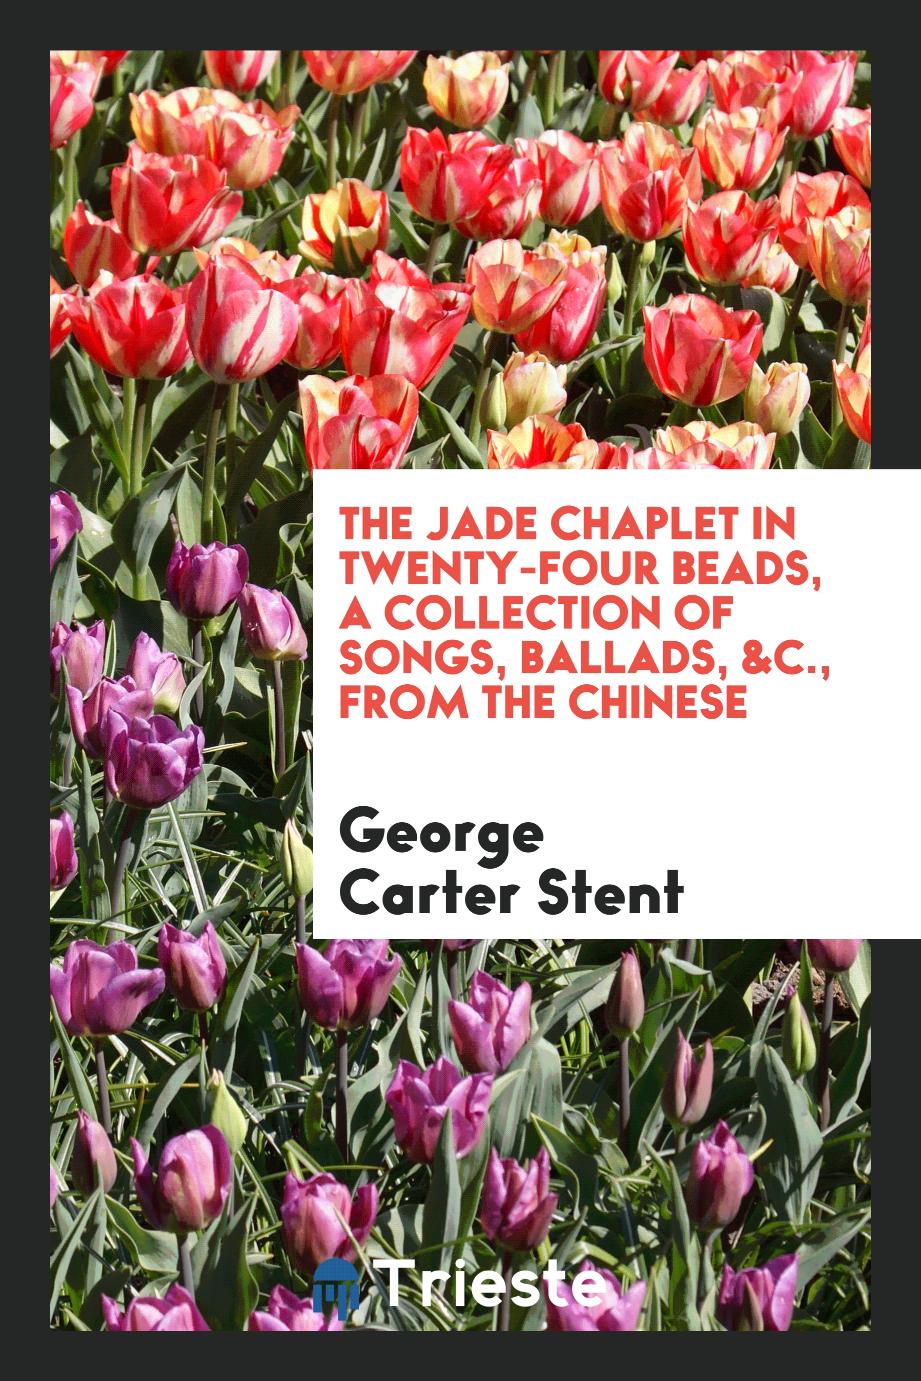 The Jade Chaplet in Twenty-Four Beads, a Collection of Songs, Ballads, &c., from the Chinese